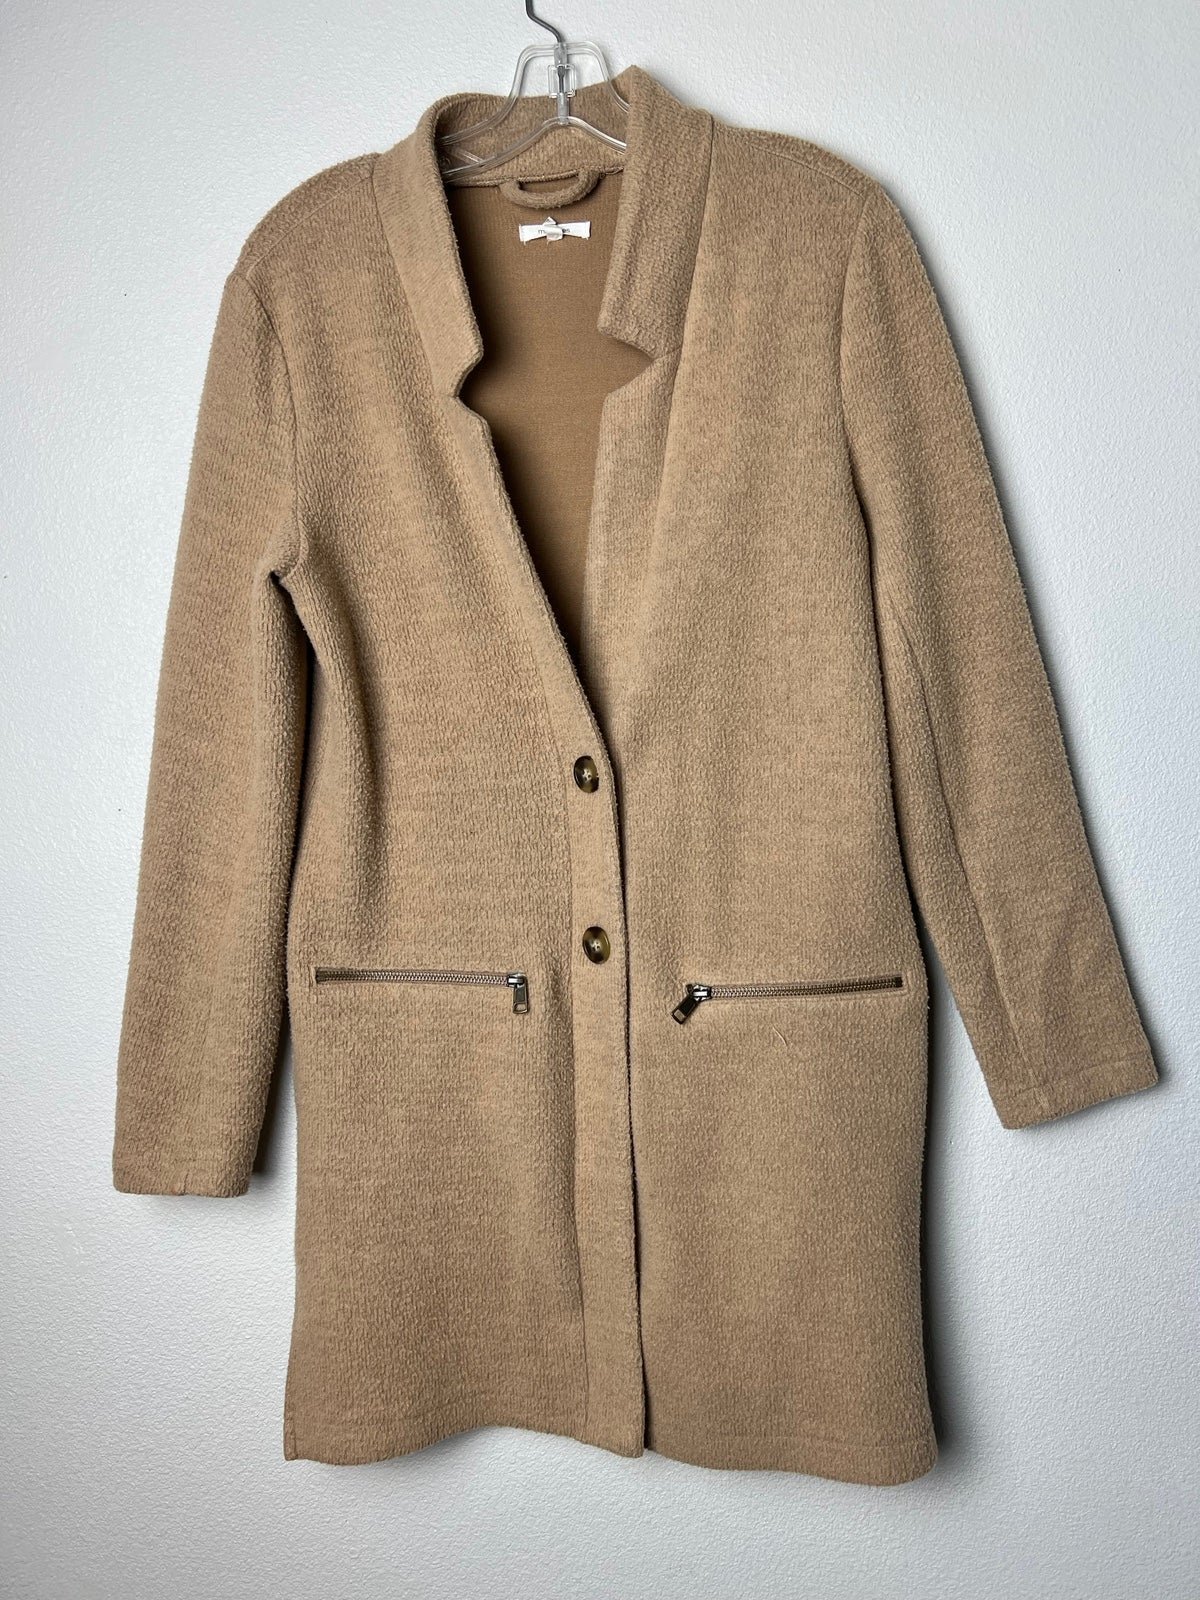 Special offer  Maurices Solid Taupe Button Front Cardigan Coat size xs OPwrpWpds well sale